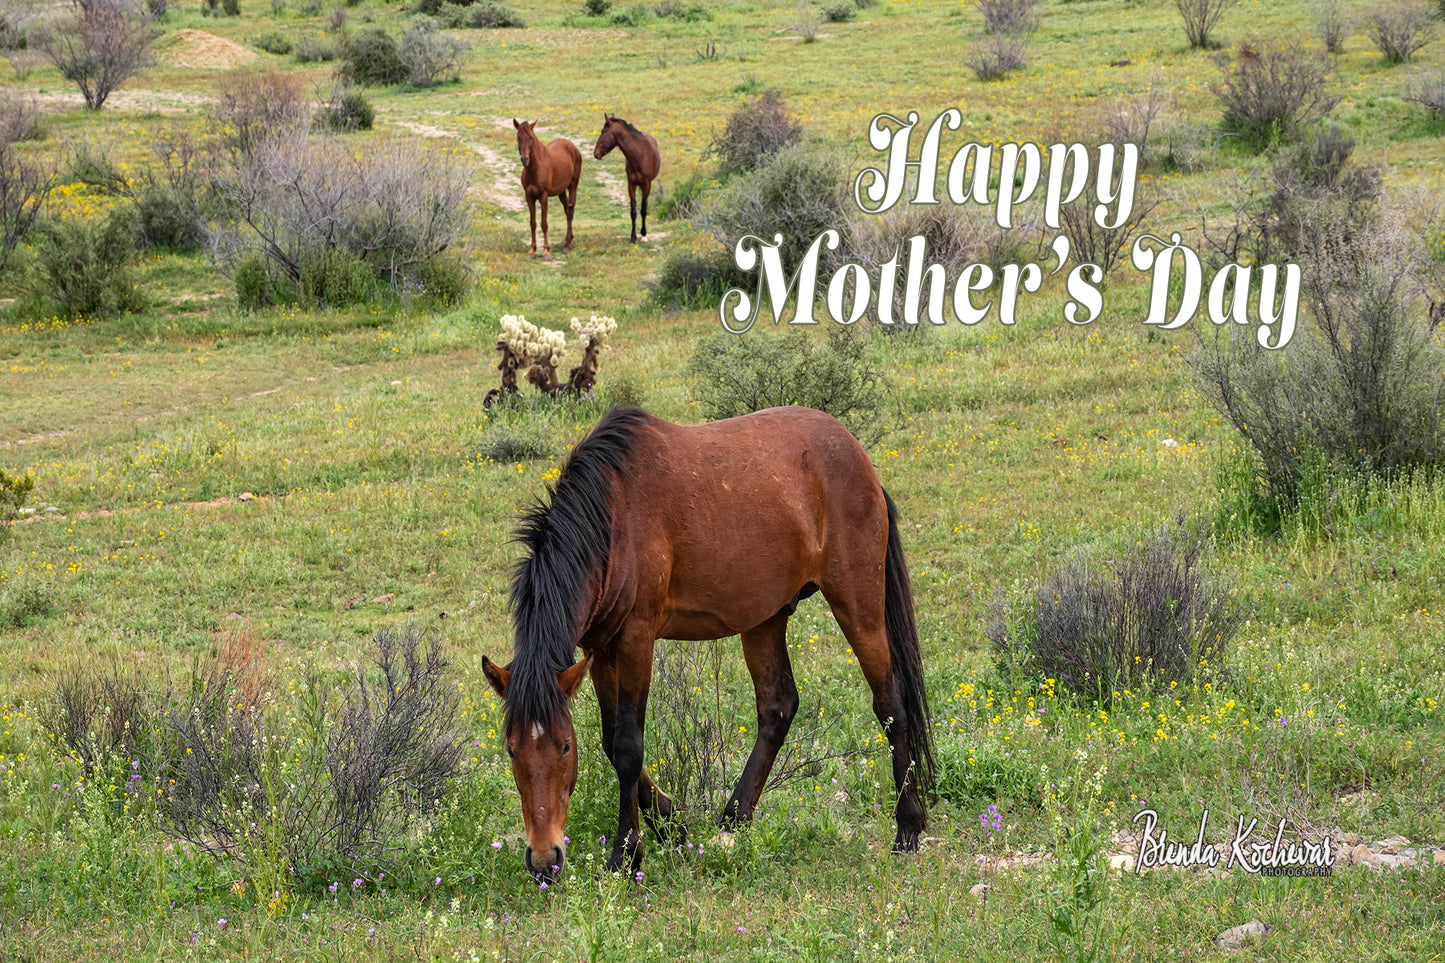 Salt River Wild Horse Friends Mother's Day Greeting Card